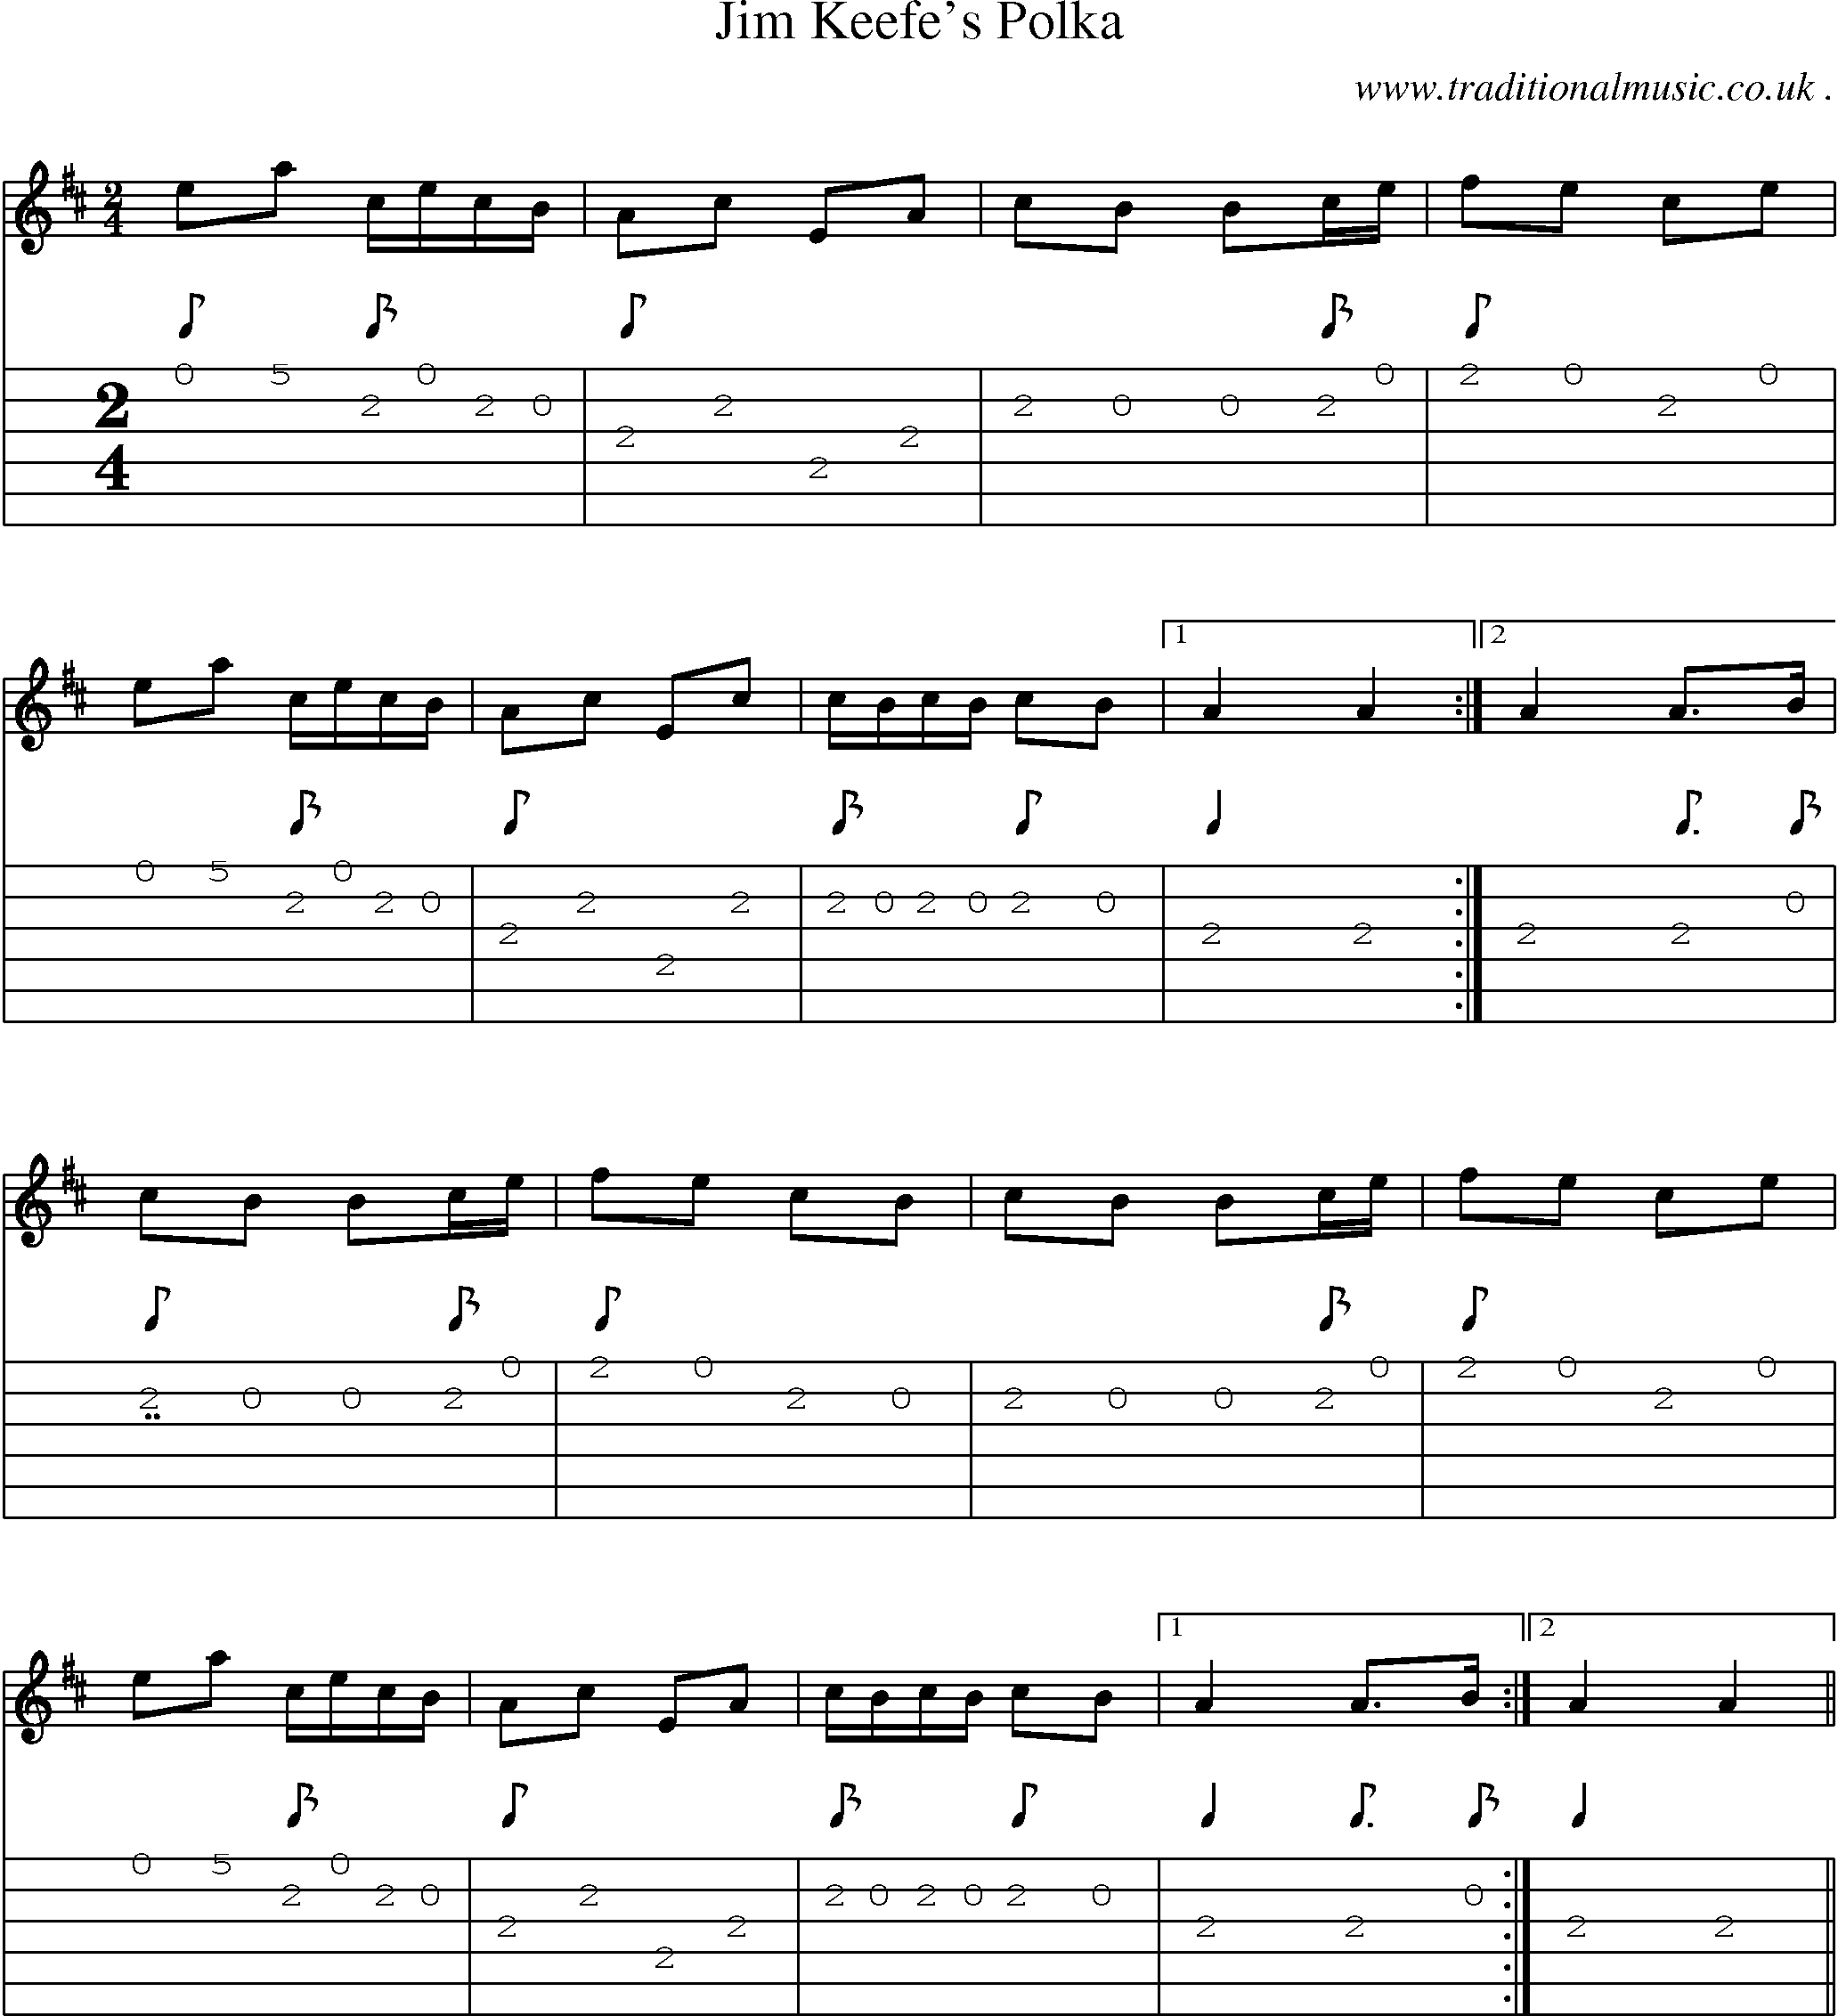 Sheet-Music and Guitar Tabs for Jim Keefes Polka